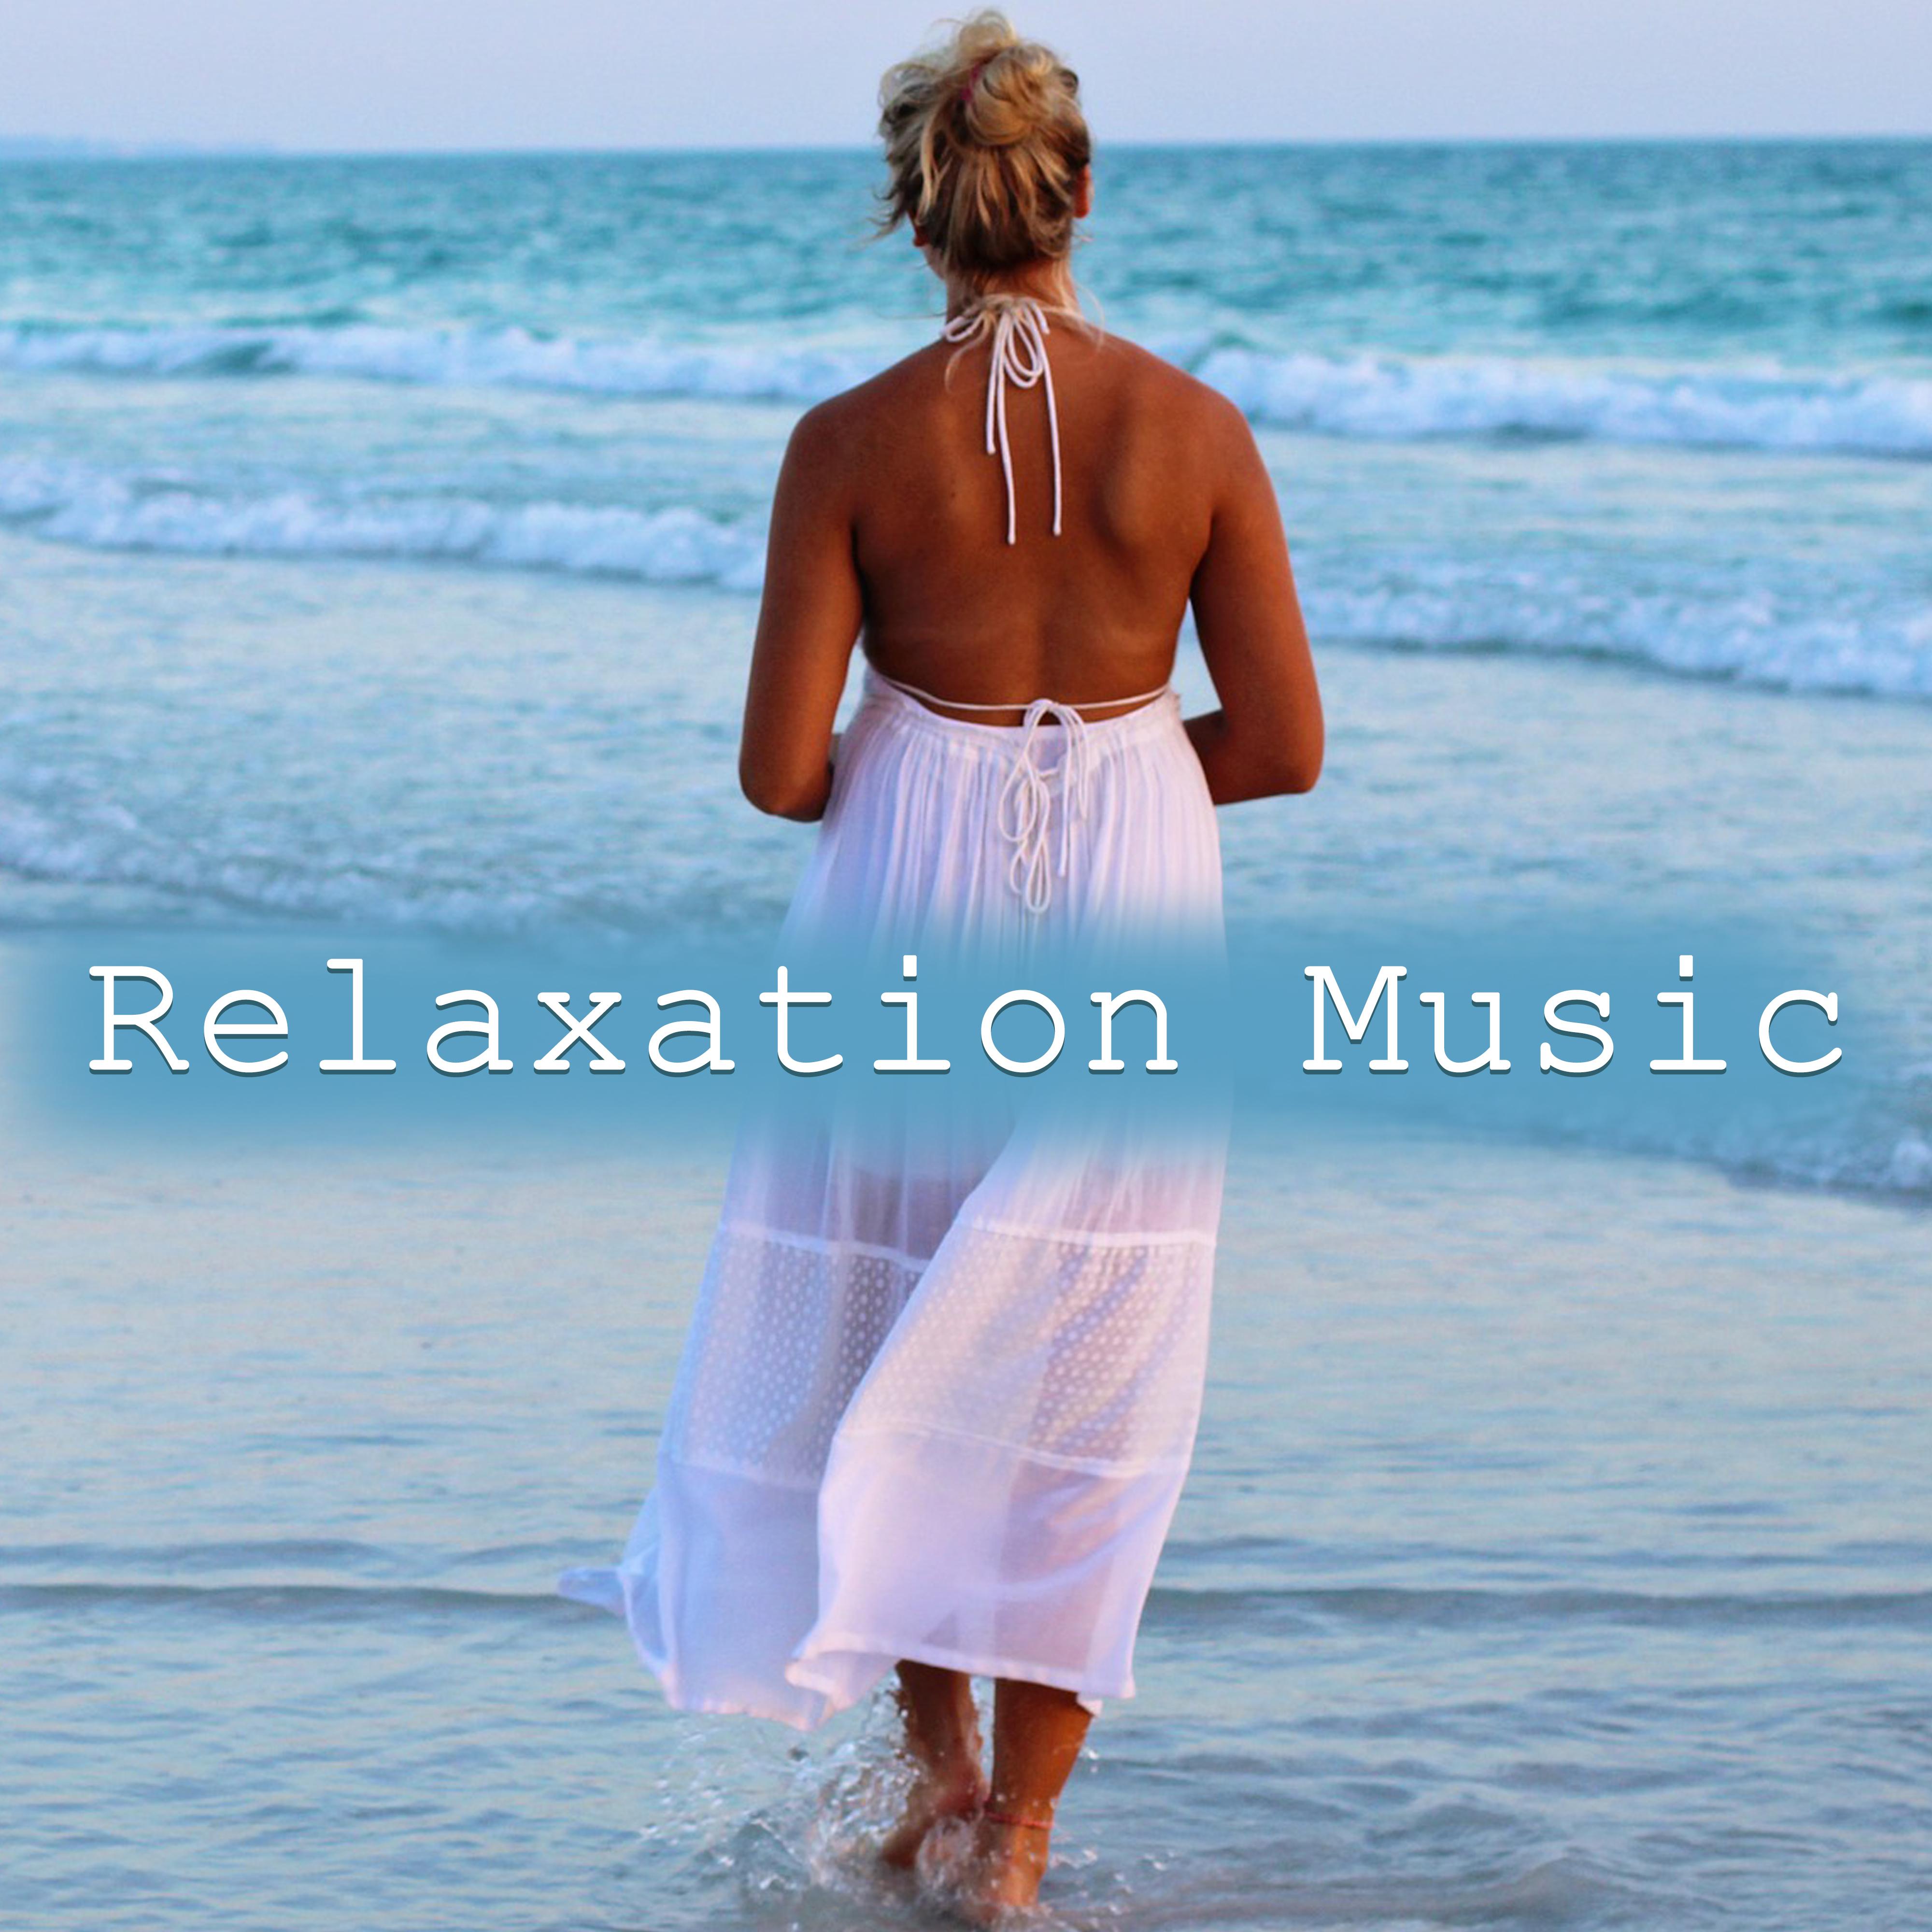 Relaxation Music  Manage Stress, Rest, Relax, Sounds of Nature, Helpful for Calm Down, Feel Better